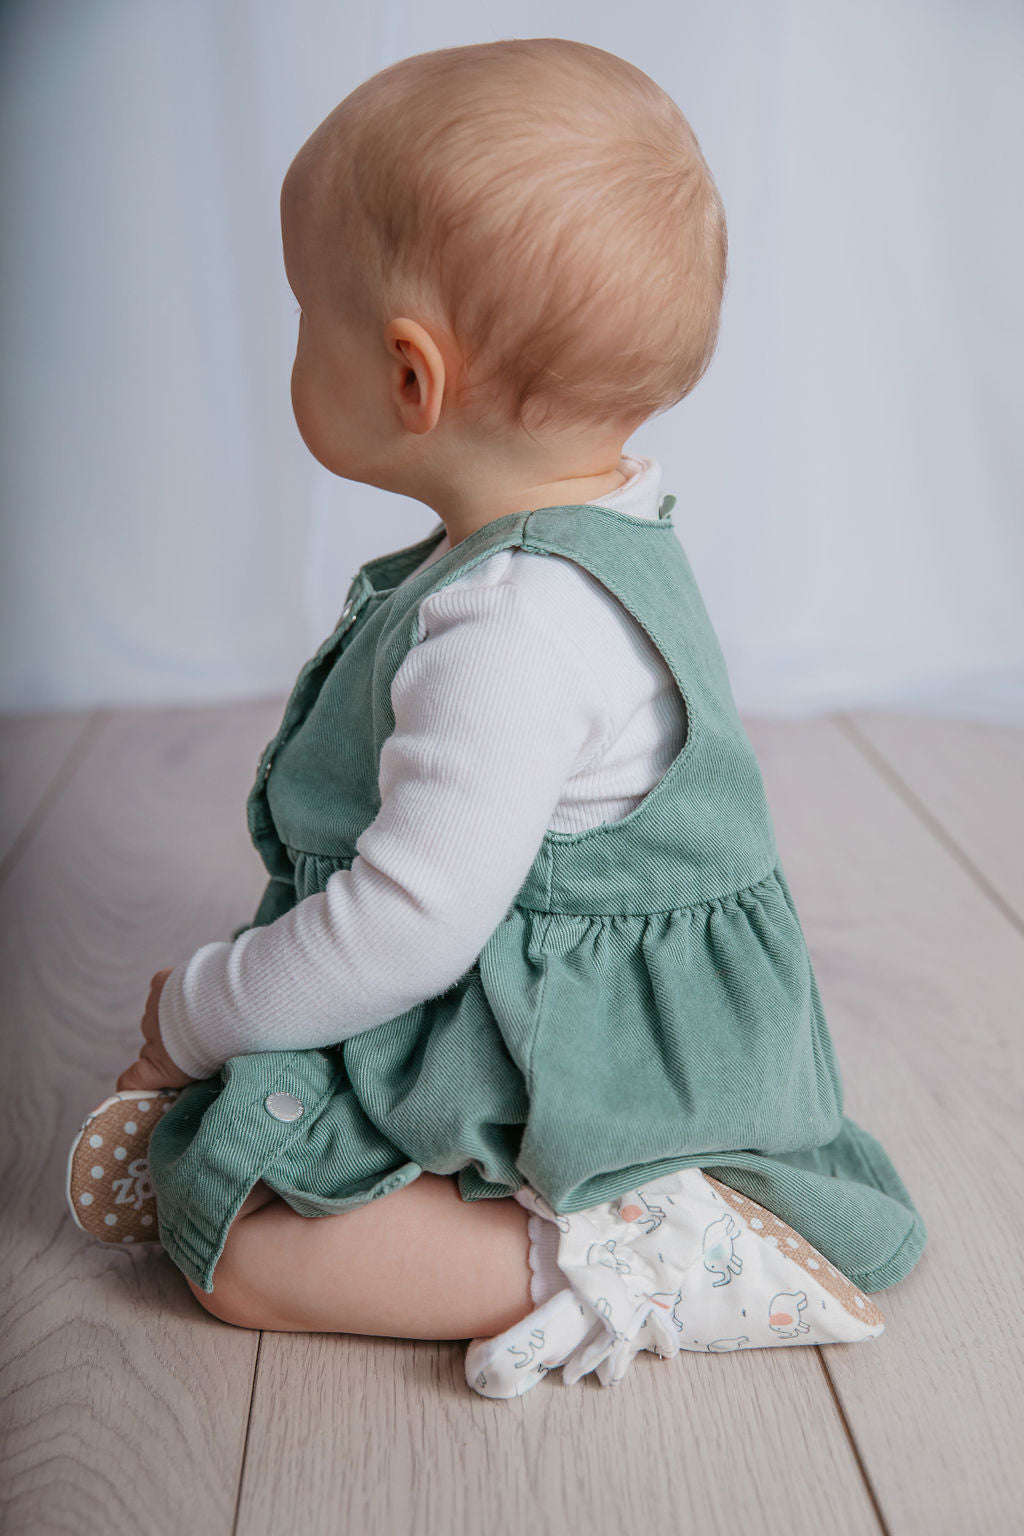 Baby girl sitting wearing a pair of stay-on baby booties featuring an elephant print on white cotton fabric, with non-slip soles and adjustable three snap closure. Made from organic cotton.